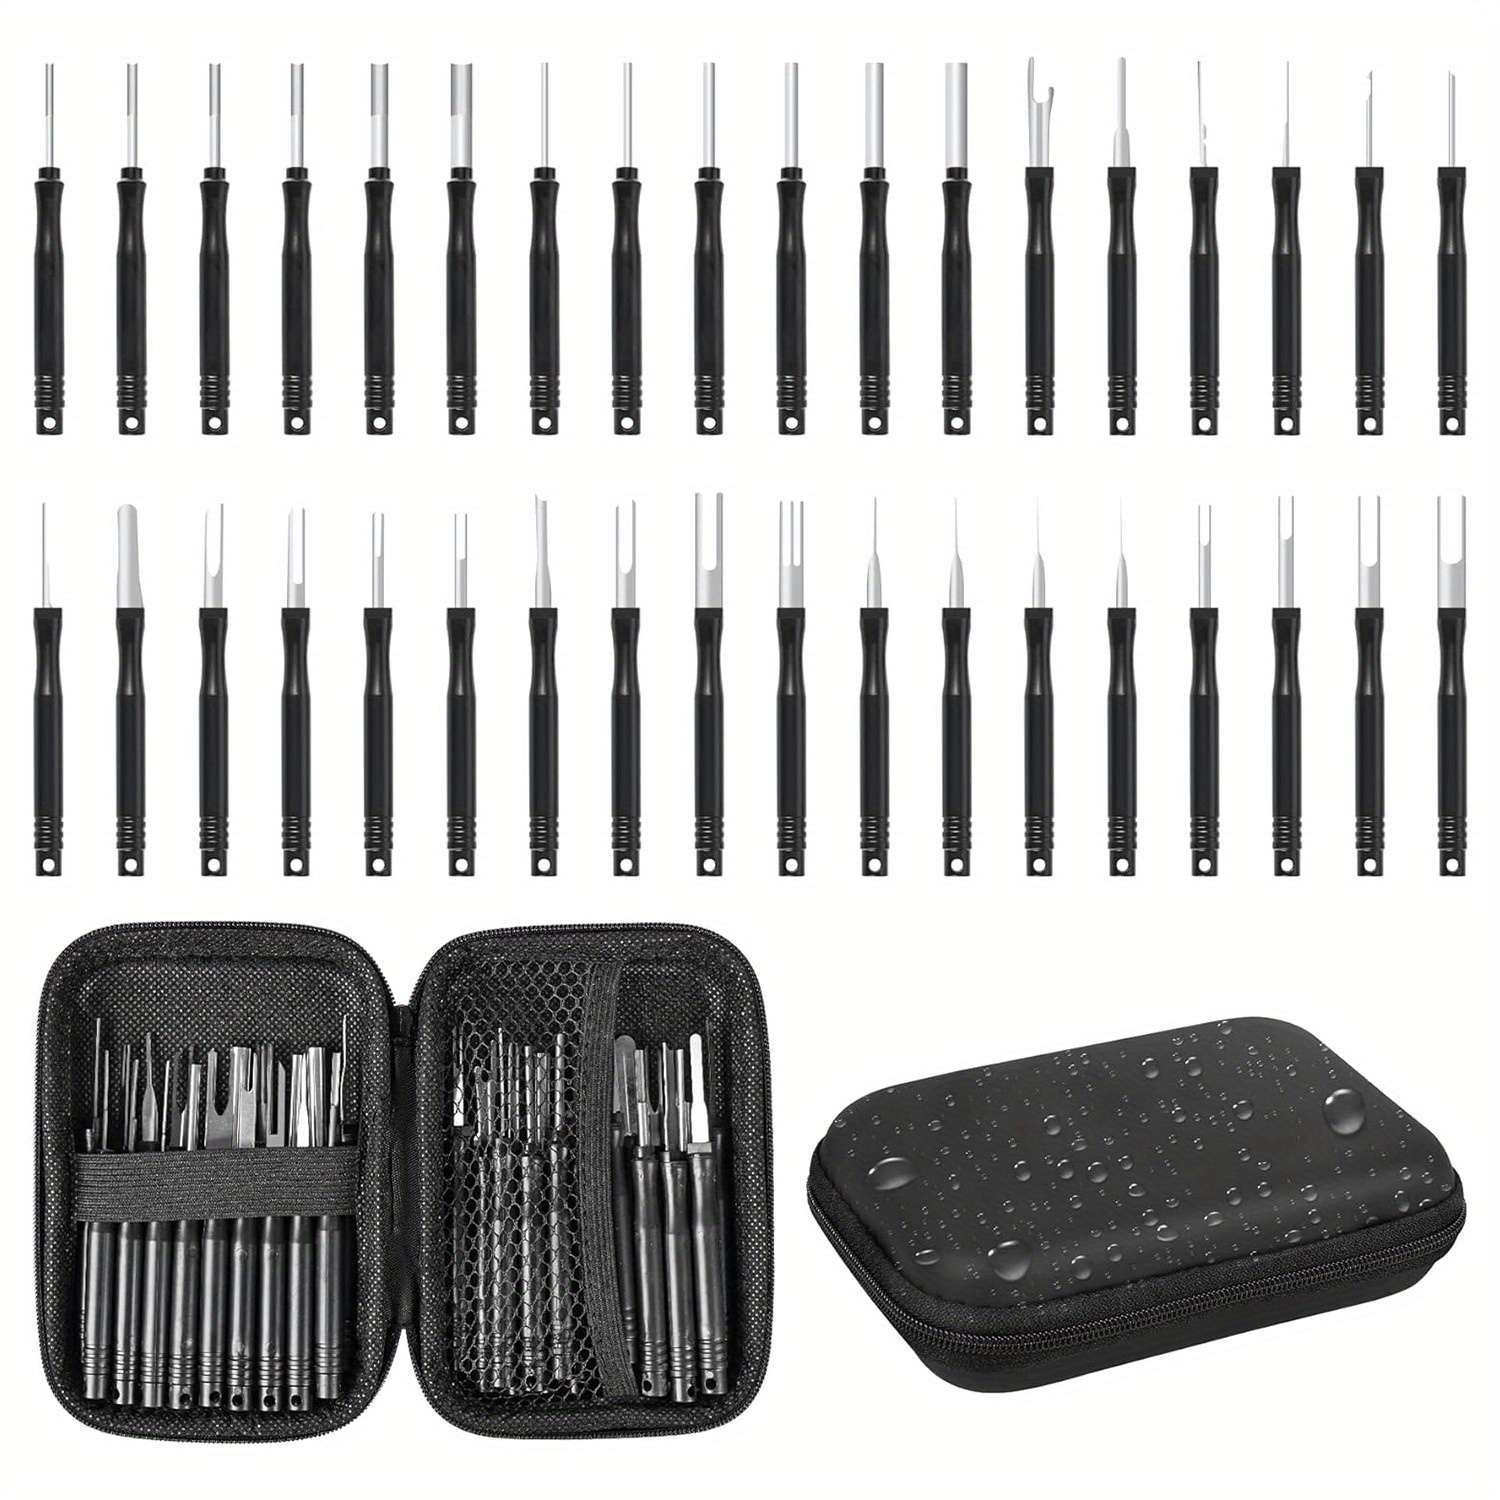 

36-piece Automotive Terminal Removal Tool Kit With Waterproof Case - Complete Pin Extractor Set For Cars & Household Devices, Insulated Material